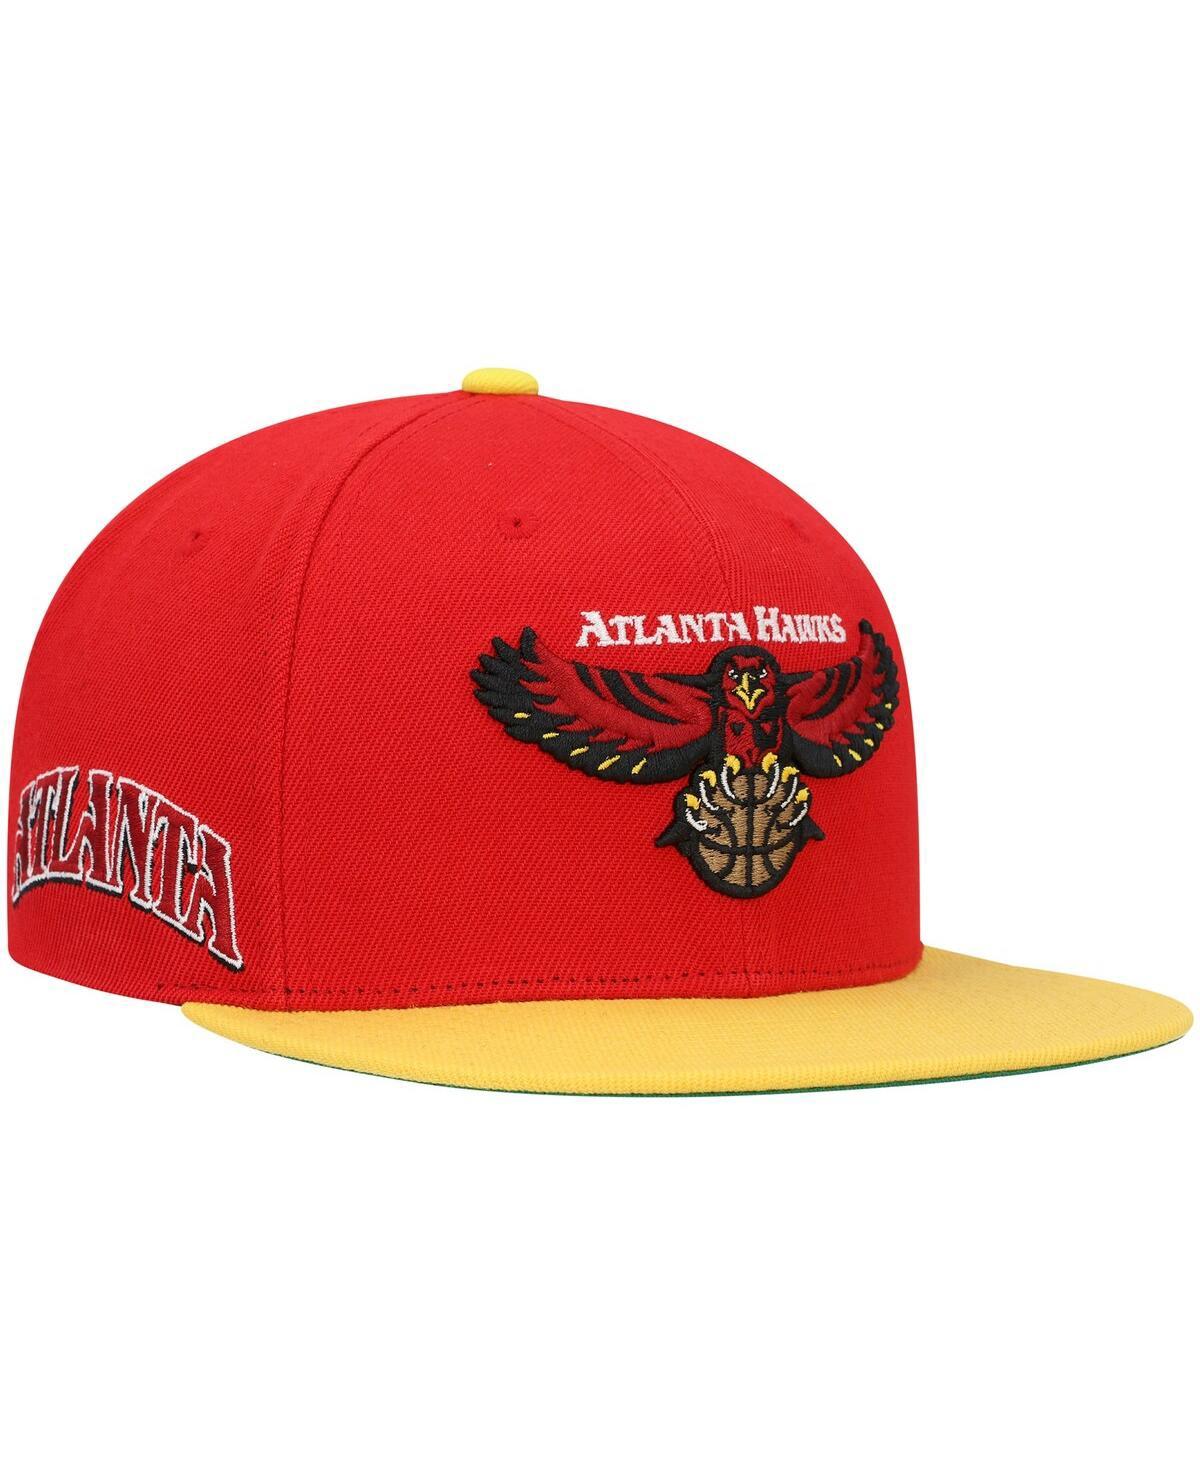 Men's LA Clippers Mitchell & Ness Red Team Ground Snapback Hat